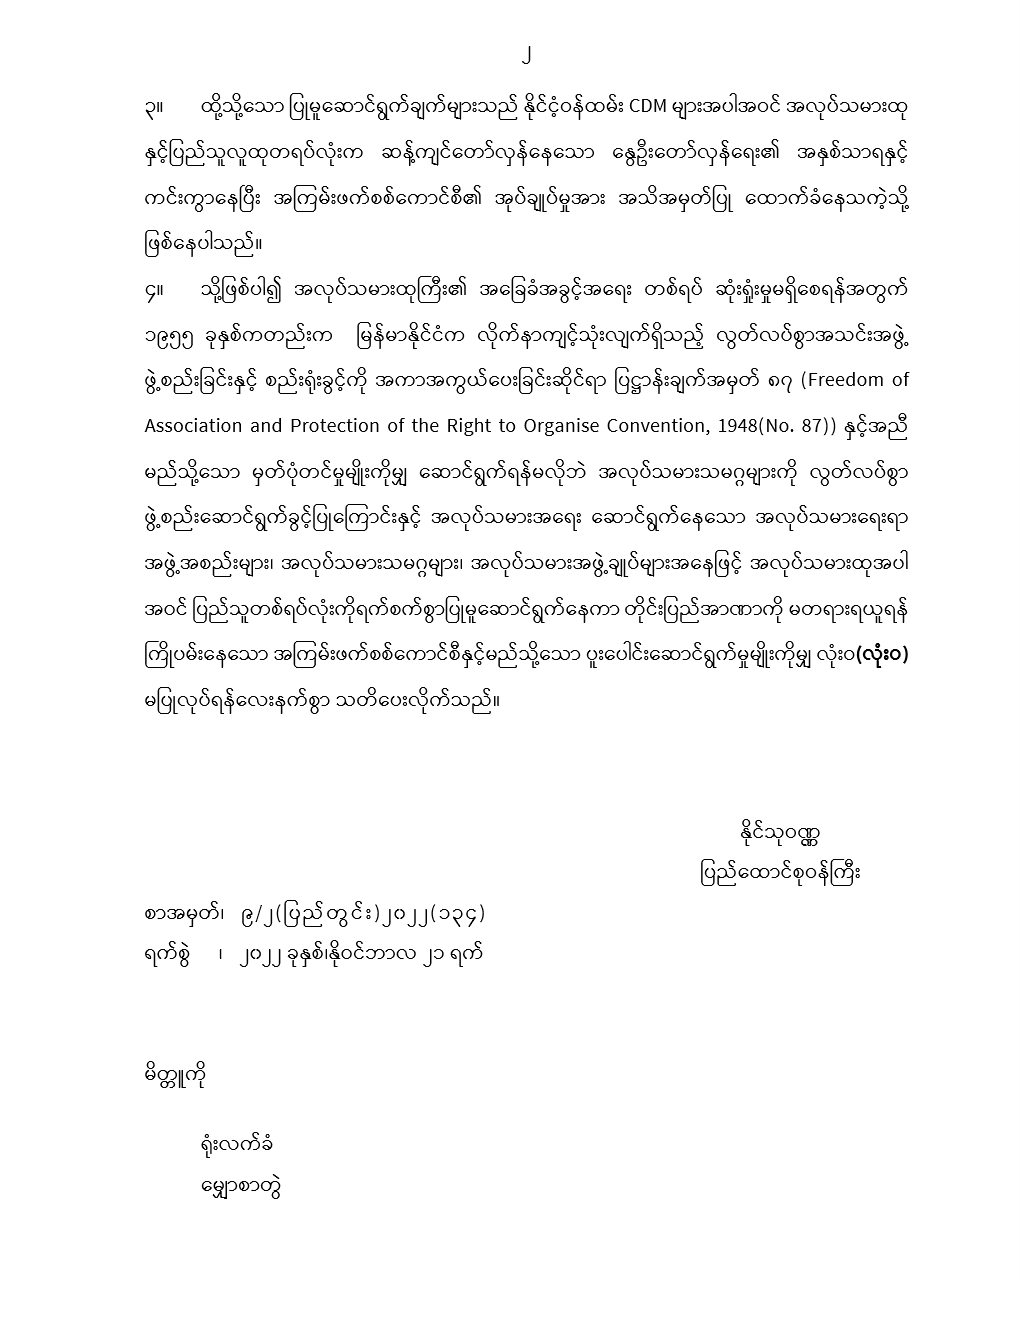 Ministry of Labour https://mol.nugmyanmar.org/my/announcements/2022-11-21-statement-13-2022/